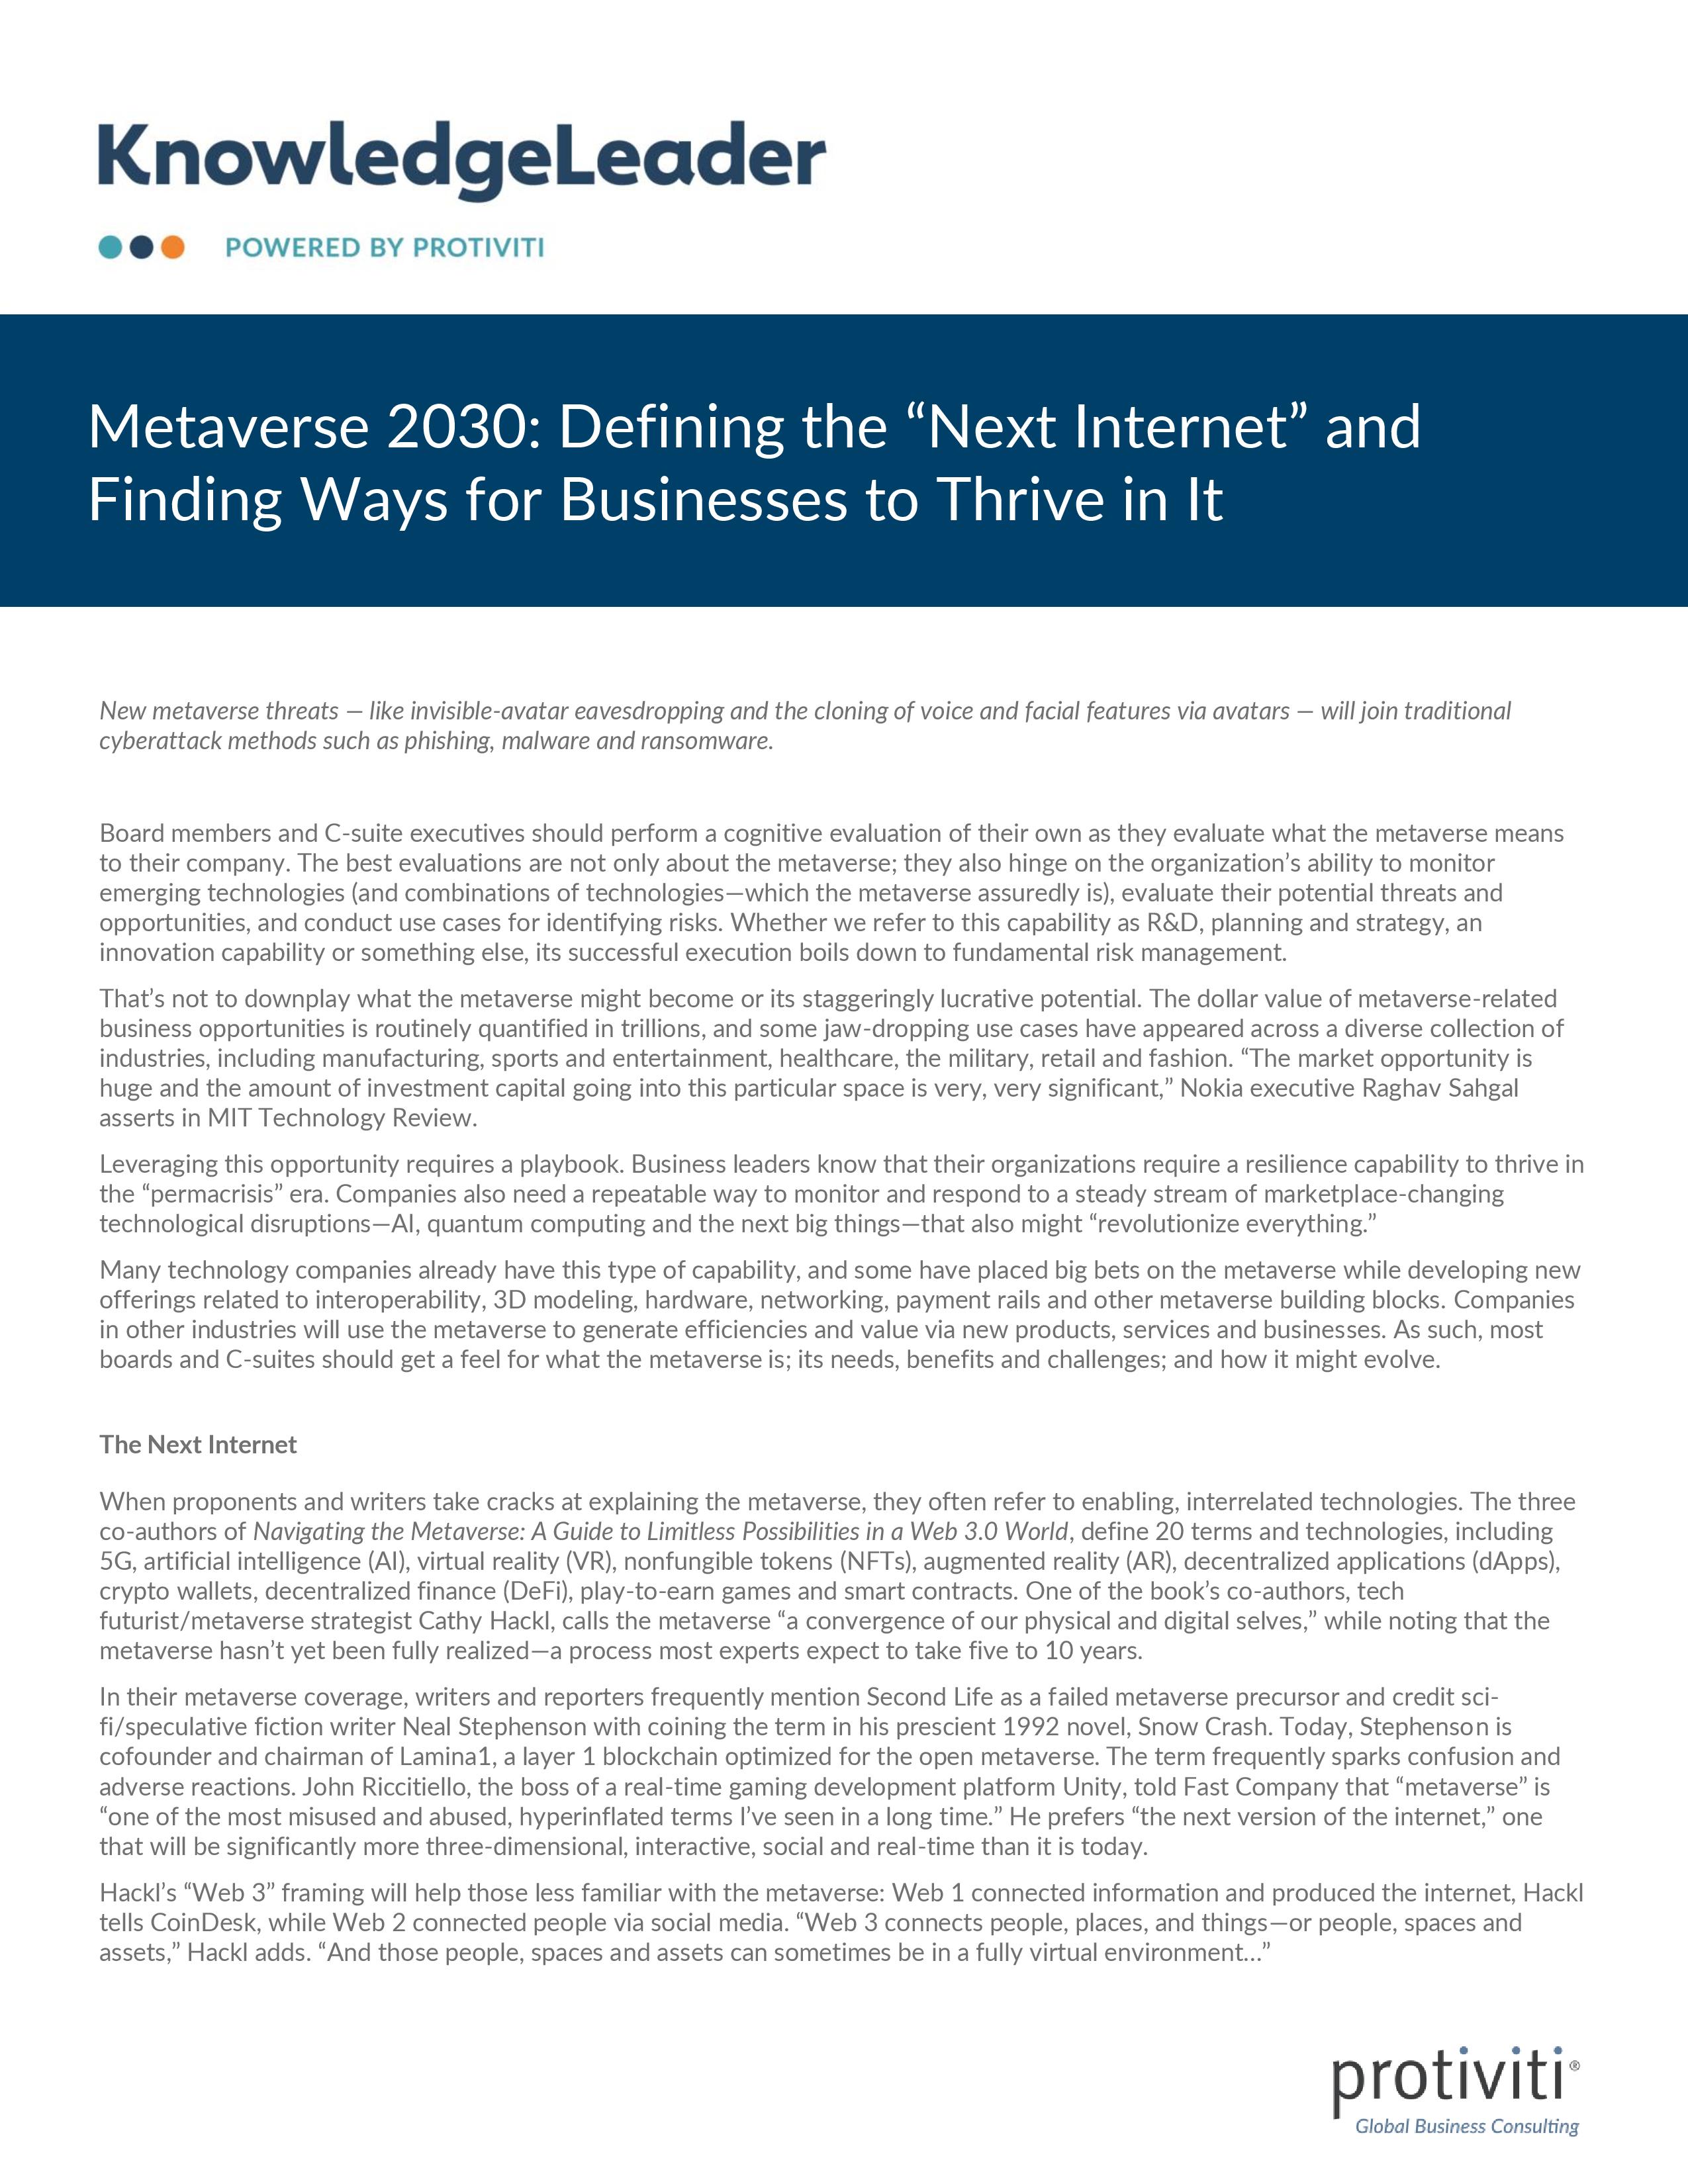 Screenshot of the first page of Metaverse 2030 Defining the “Next Internet” and Finding Ways for Businesses to Thrive in It